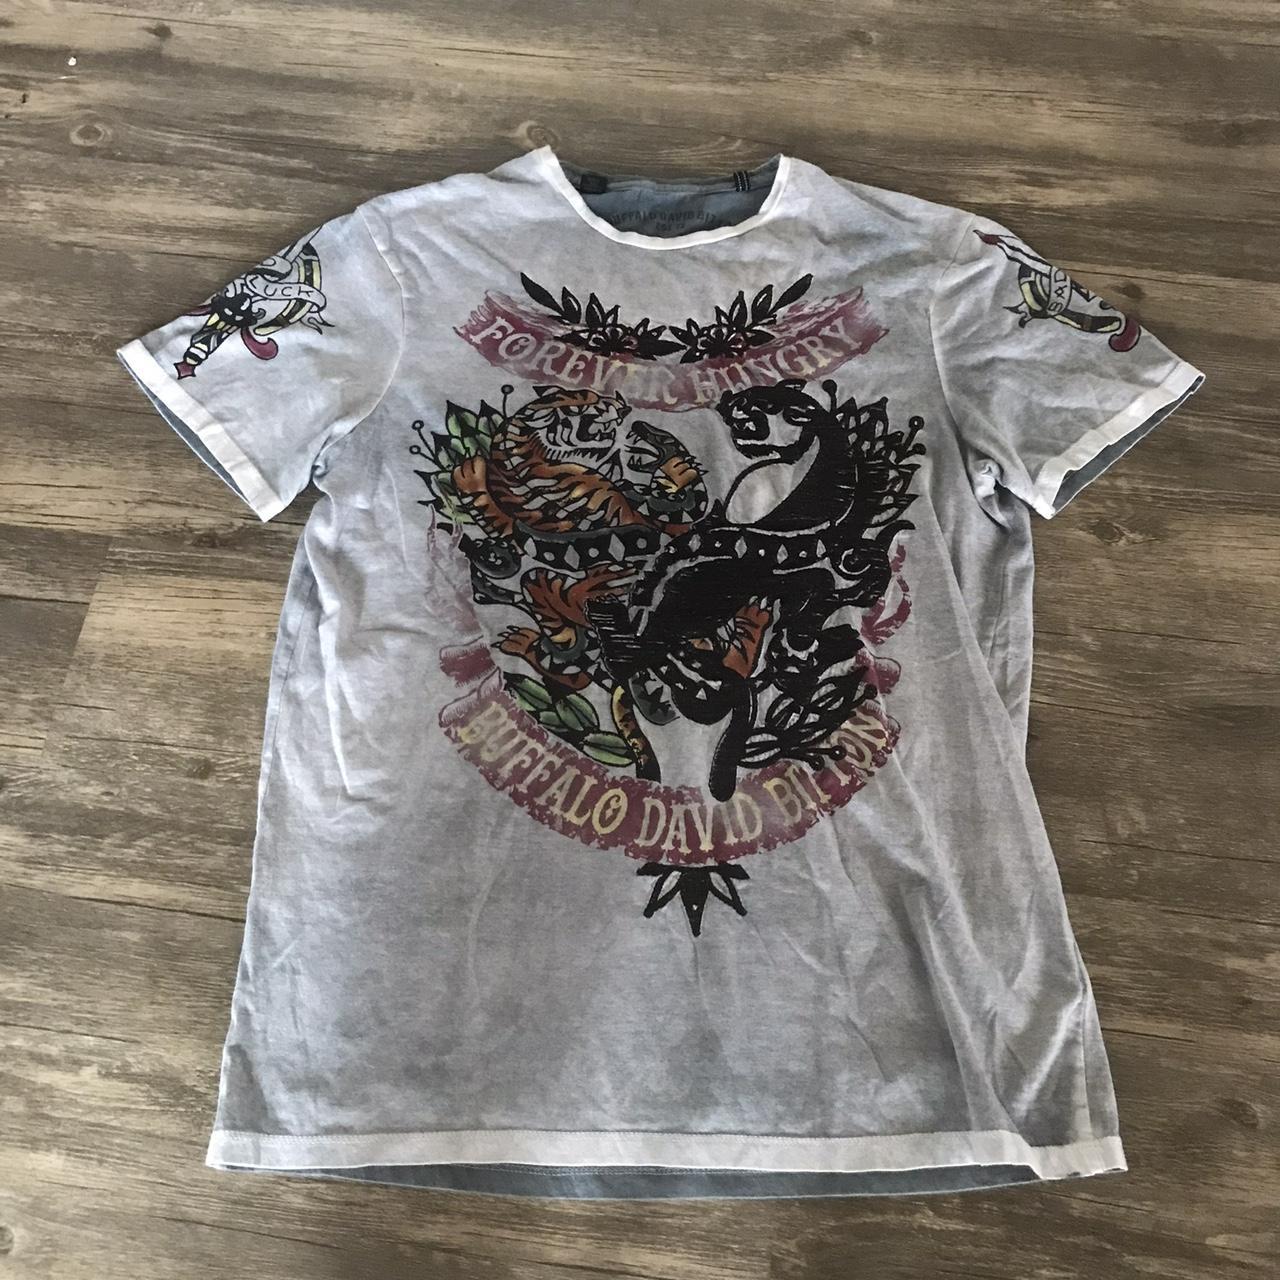 Cyber y2k grunge mall goth tee grunge tee from the - Depop